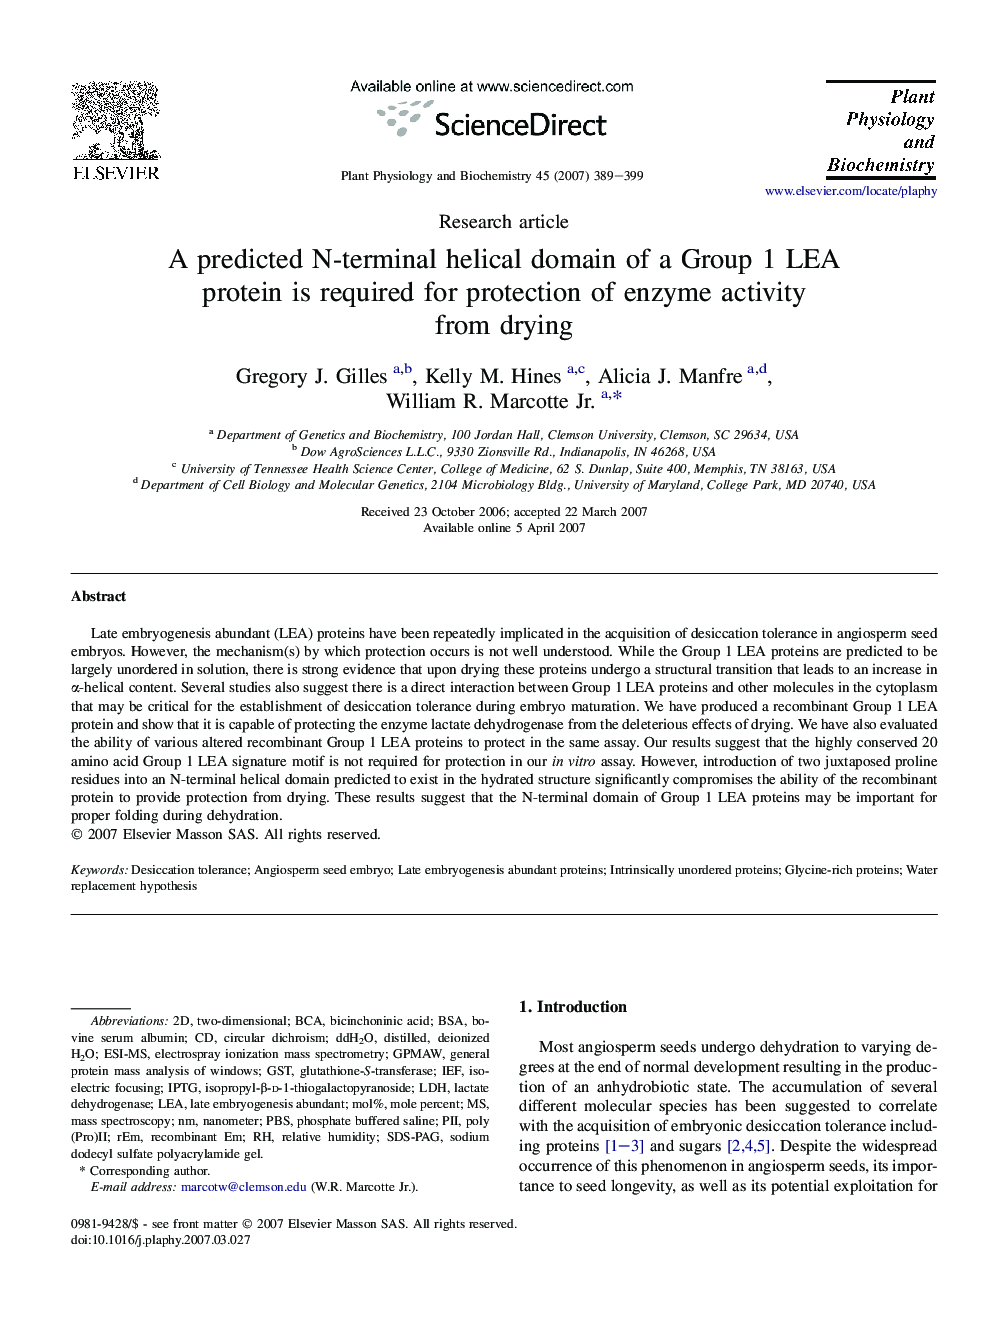 A predicted N-terminal helical domain of a Group 1 LEA protein is required for protection of enzyme activity from drying